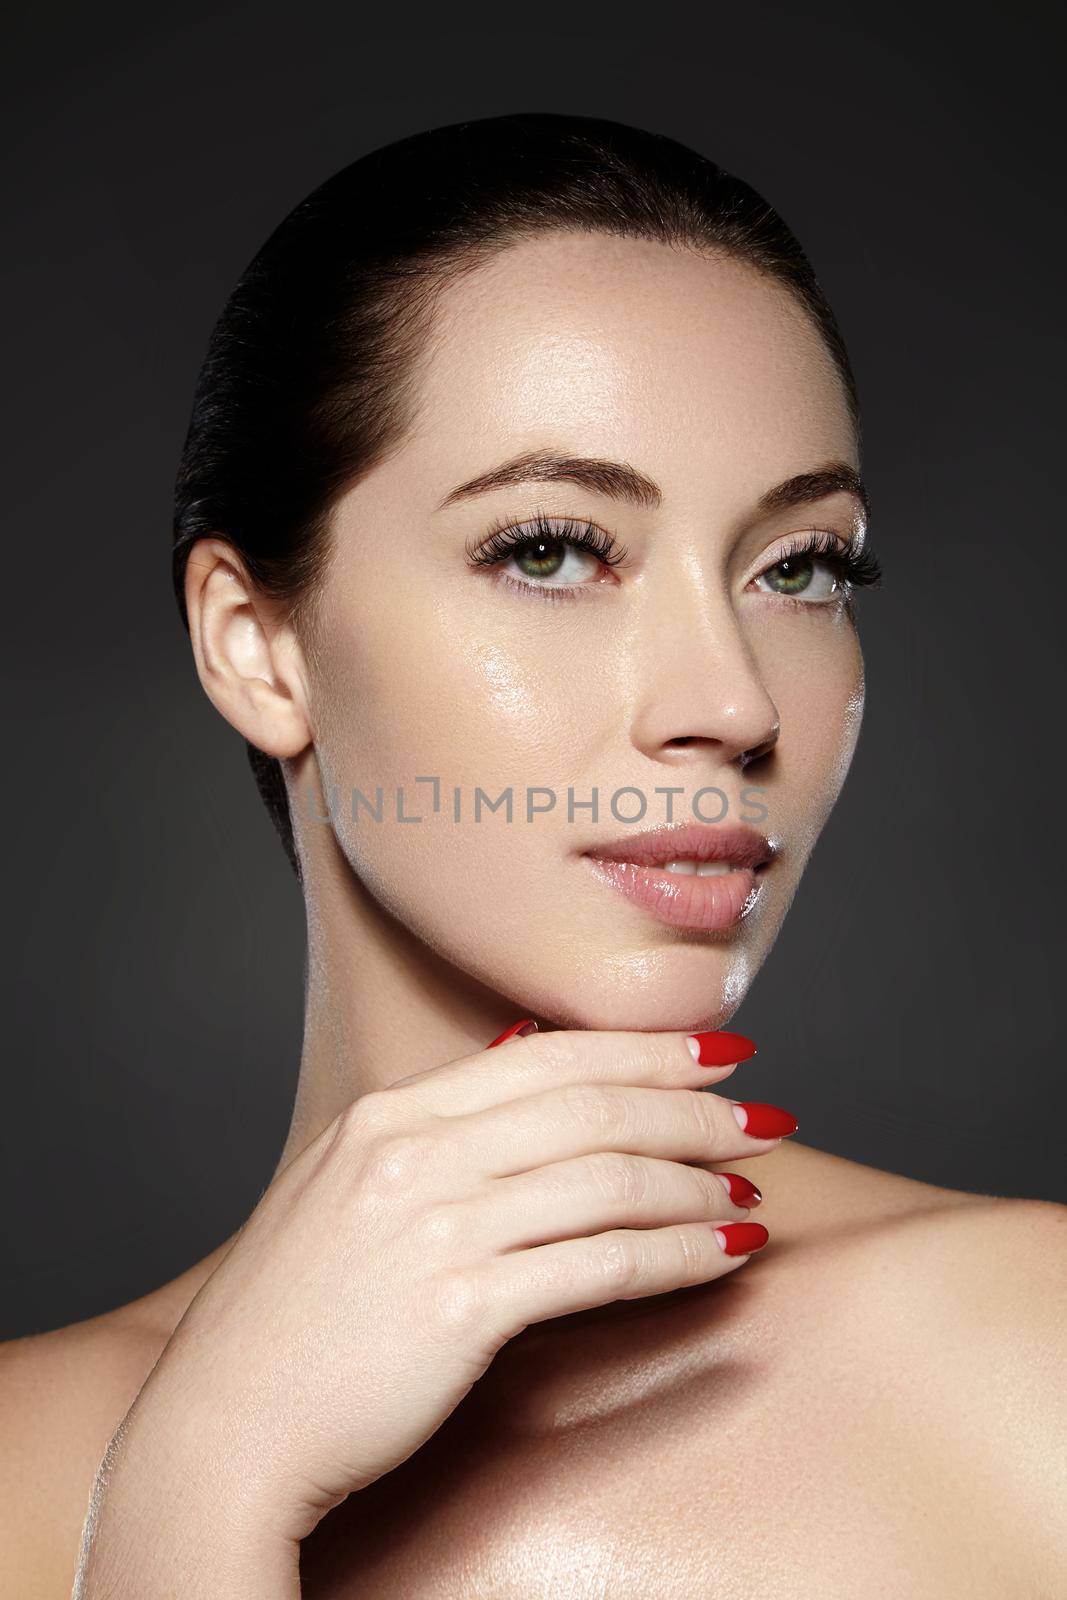 Beautiful woman show her erfect face with fashion make-up. Extreme eyelashes, plump lips, clean skin. Fresh spa look by MarinaFrost